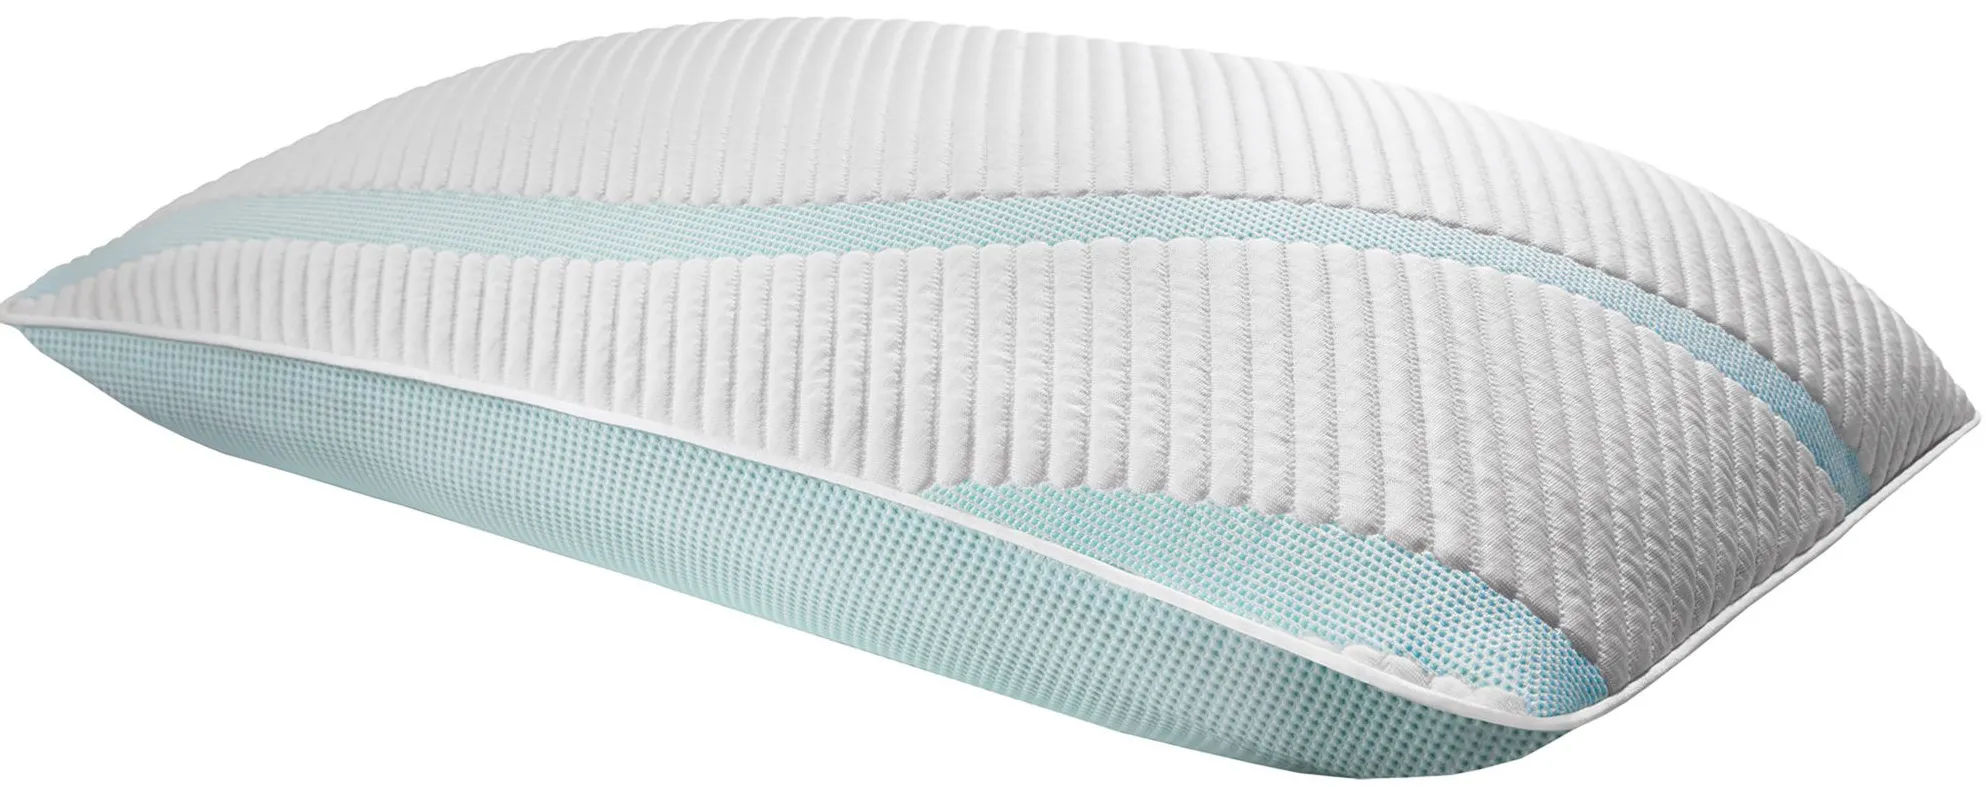 TEMPUR-Adapt ProMid + Cooling Pillow in White